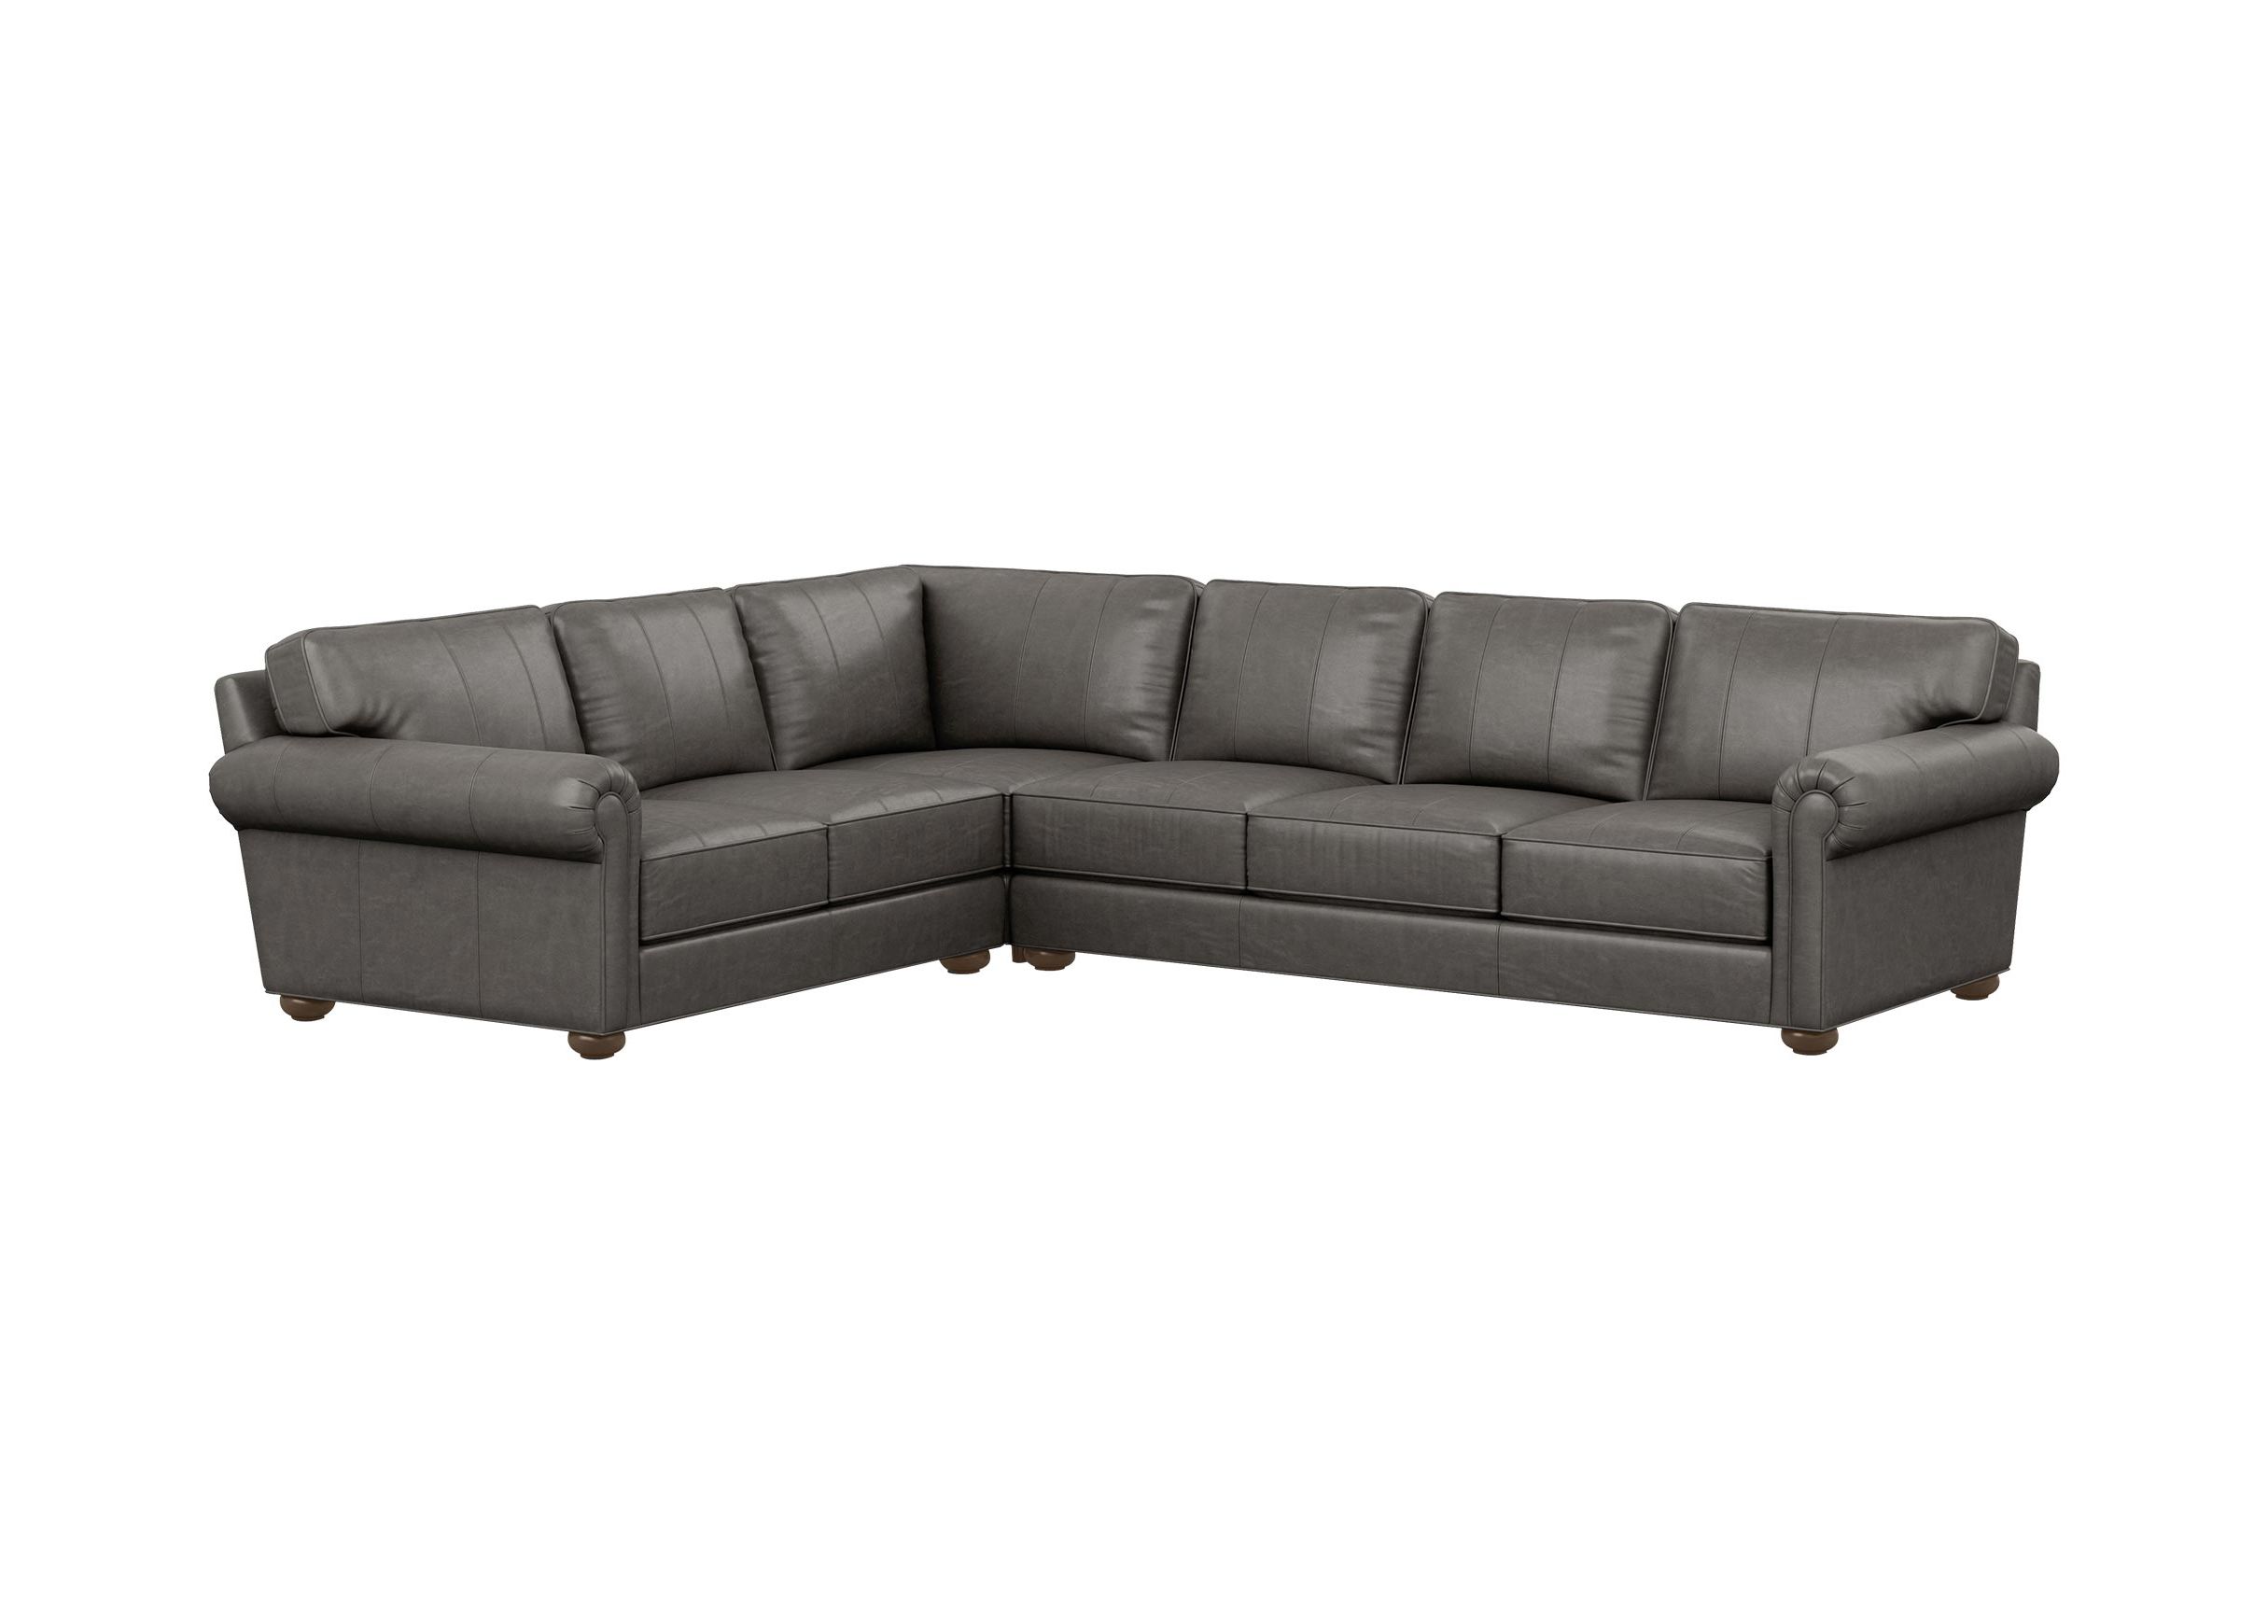 Richmond Three Piece Leather Grand Sectional (View 10 of 15)